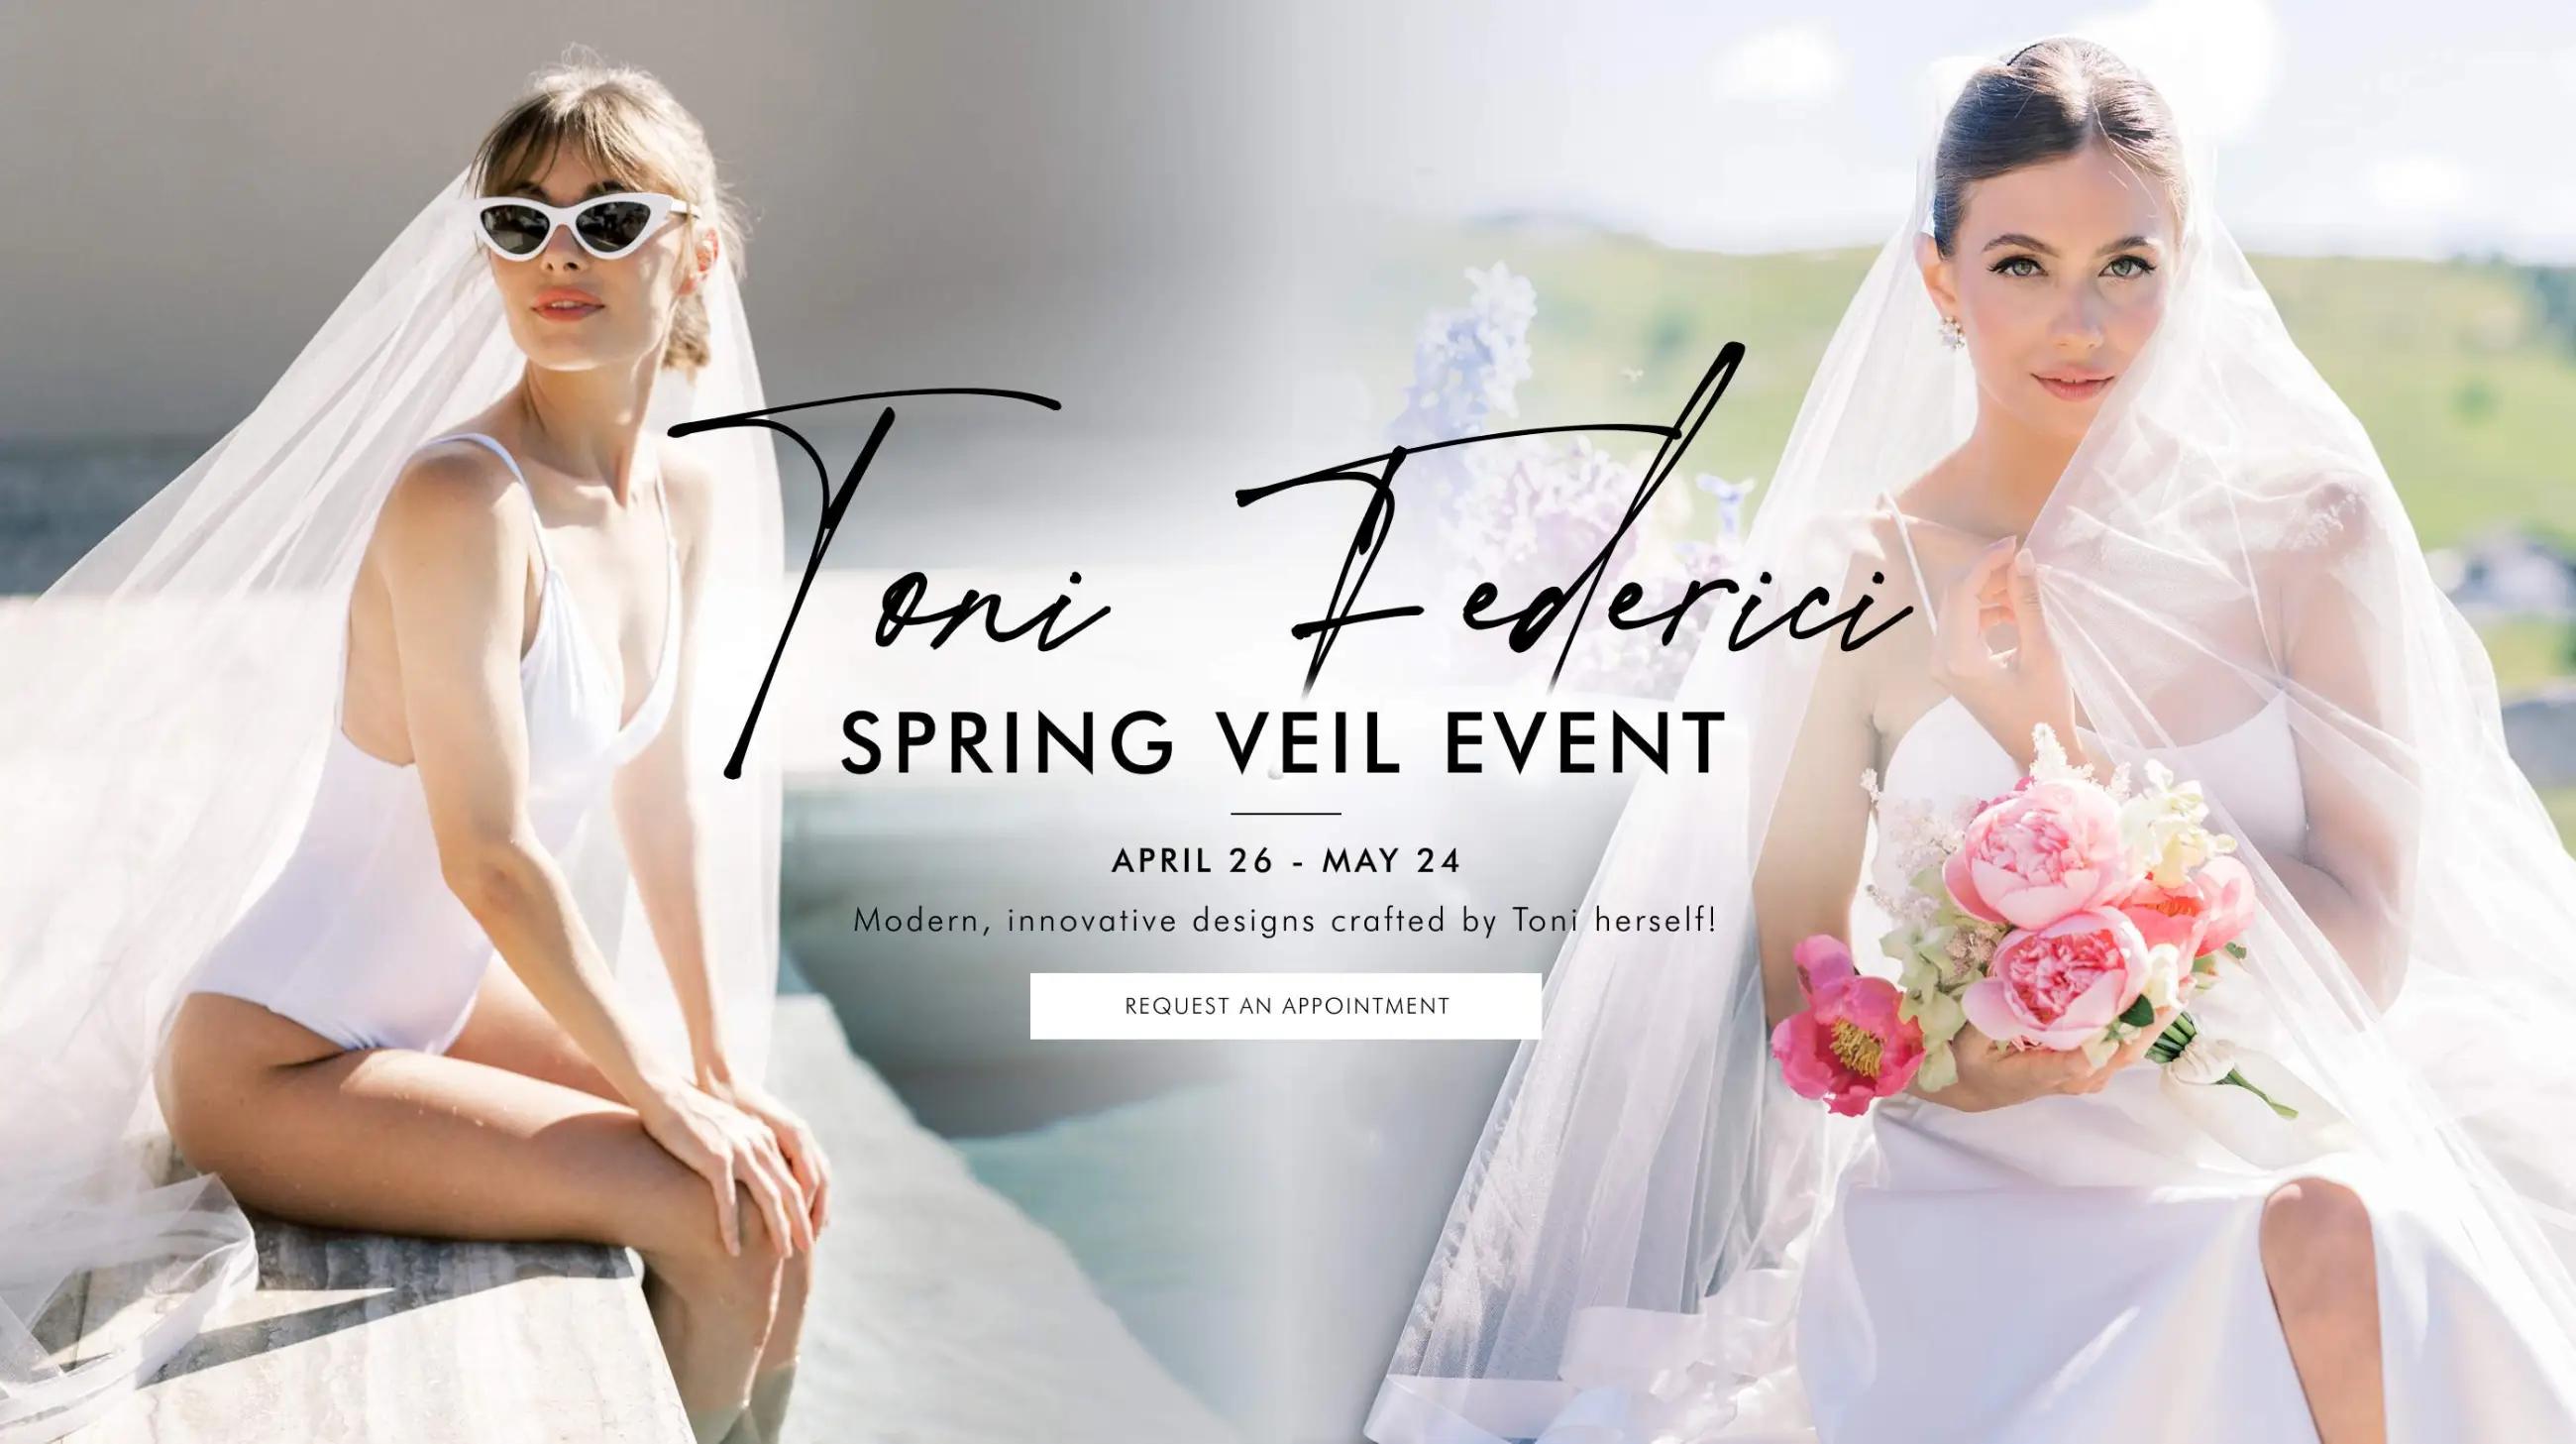 Toni Federici Spring Veil Event at Madeleine's Daughter